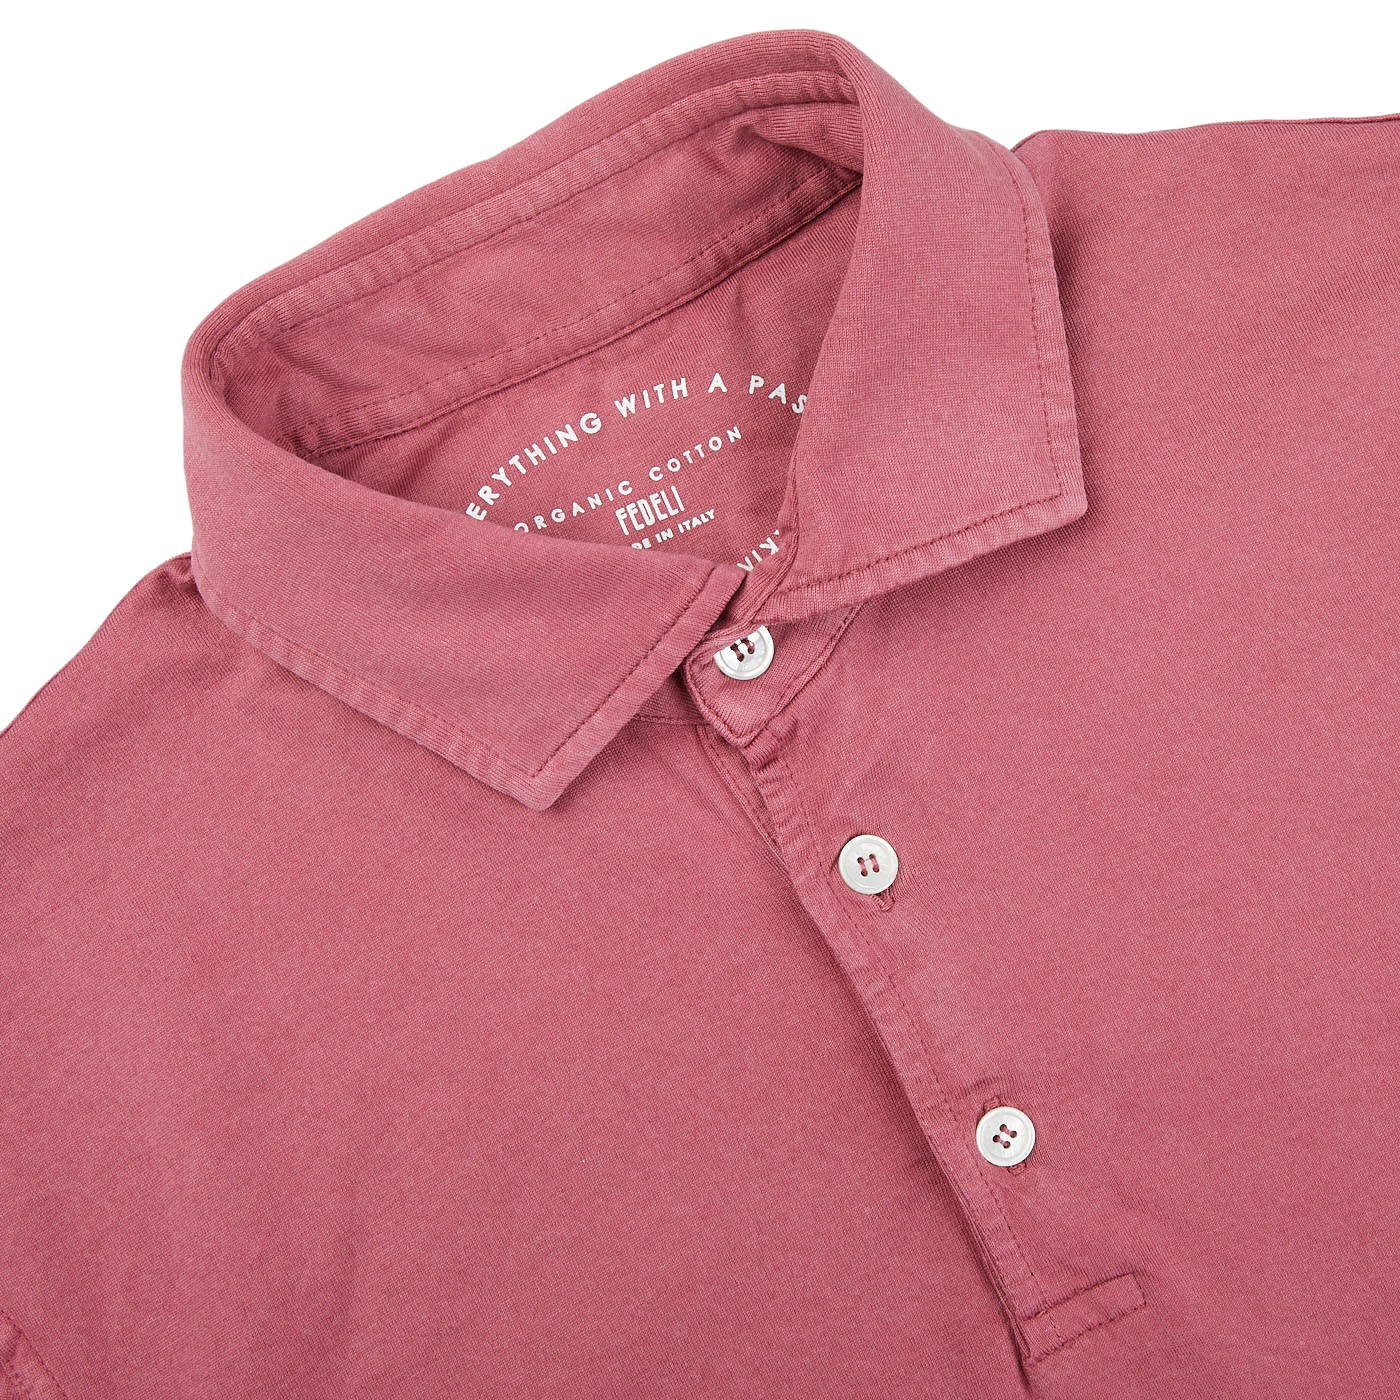 The Fedeli luxury casual-wear specialist's Washed Raspberry Organic Cotton Polo Shirt.